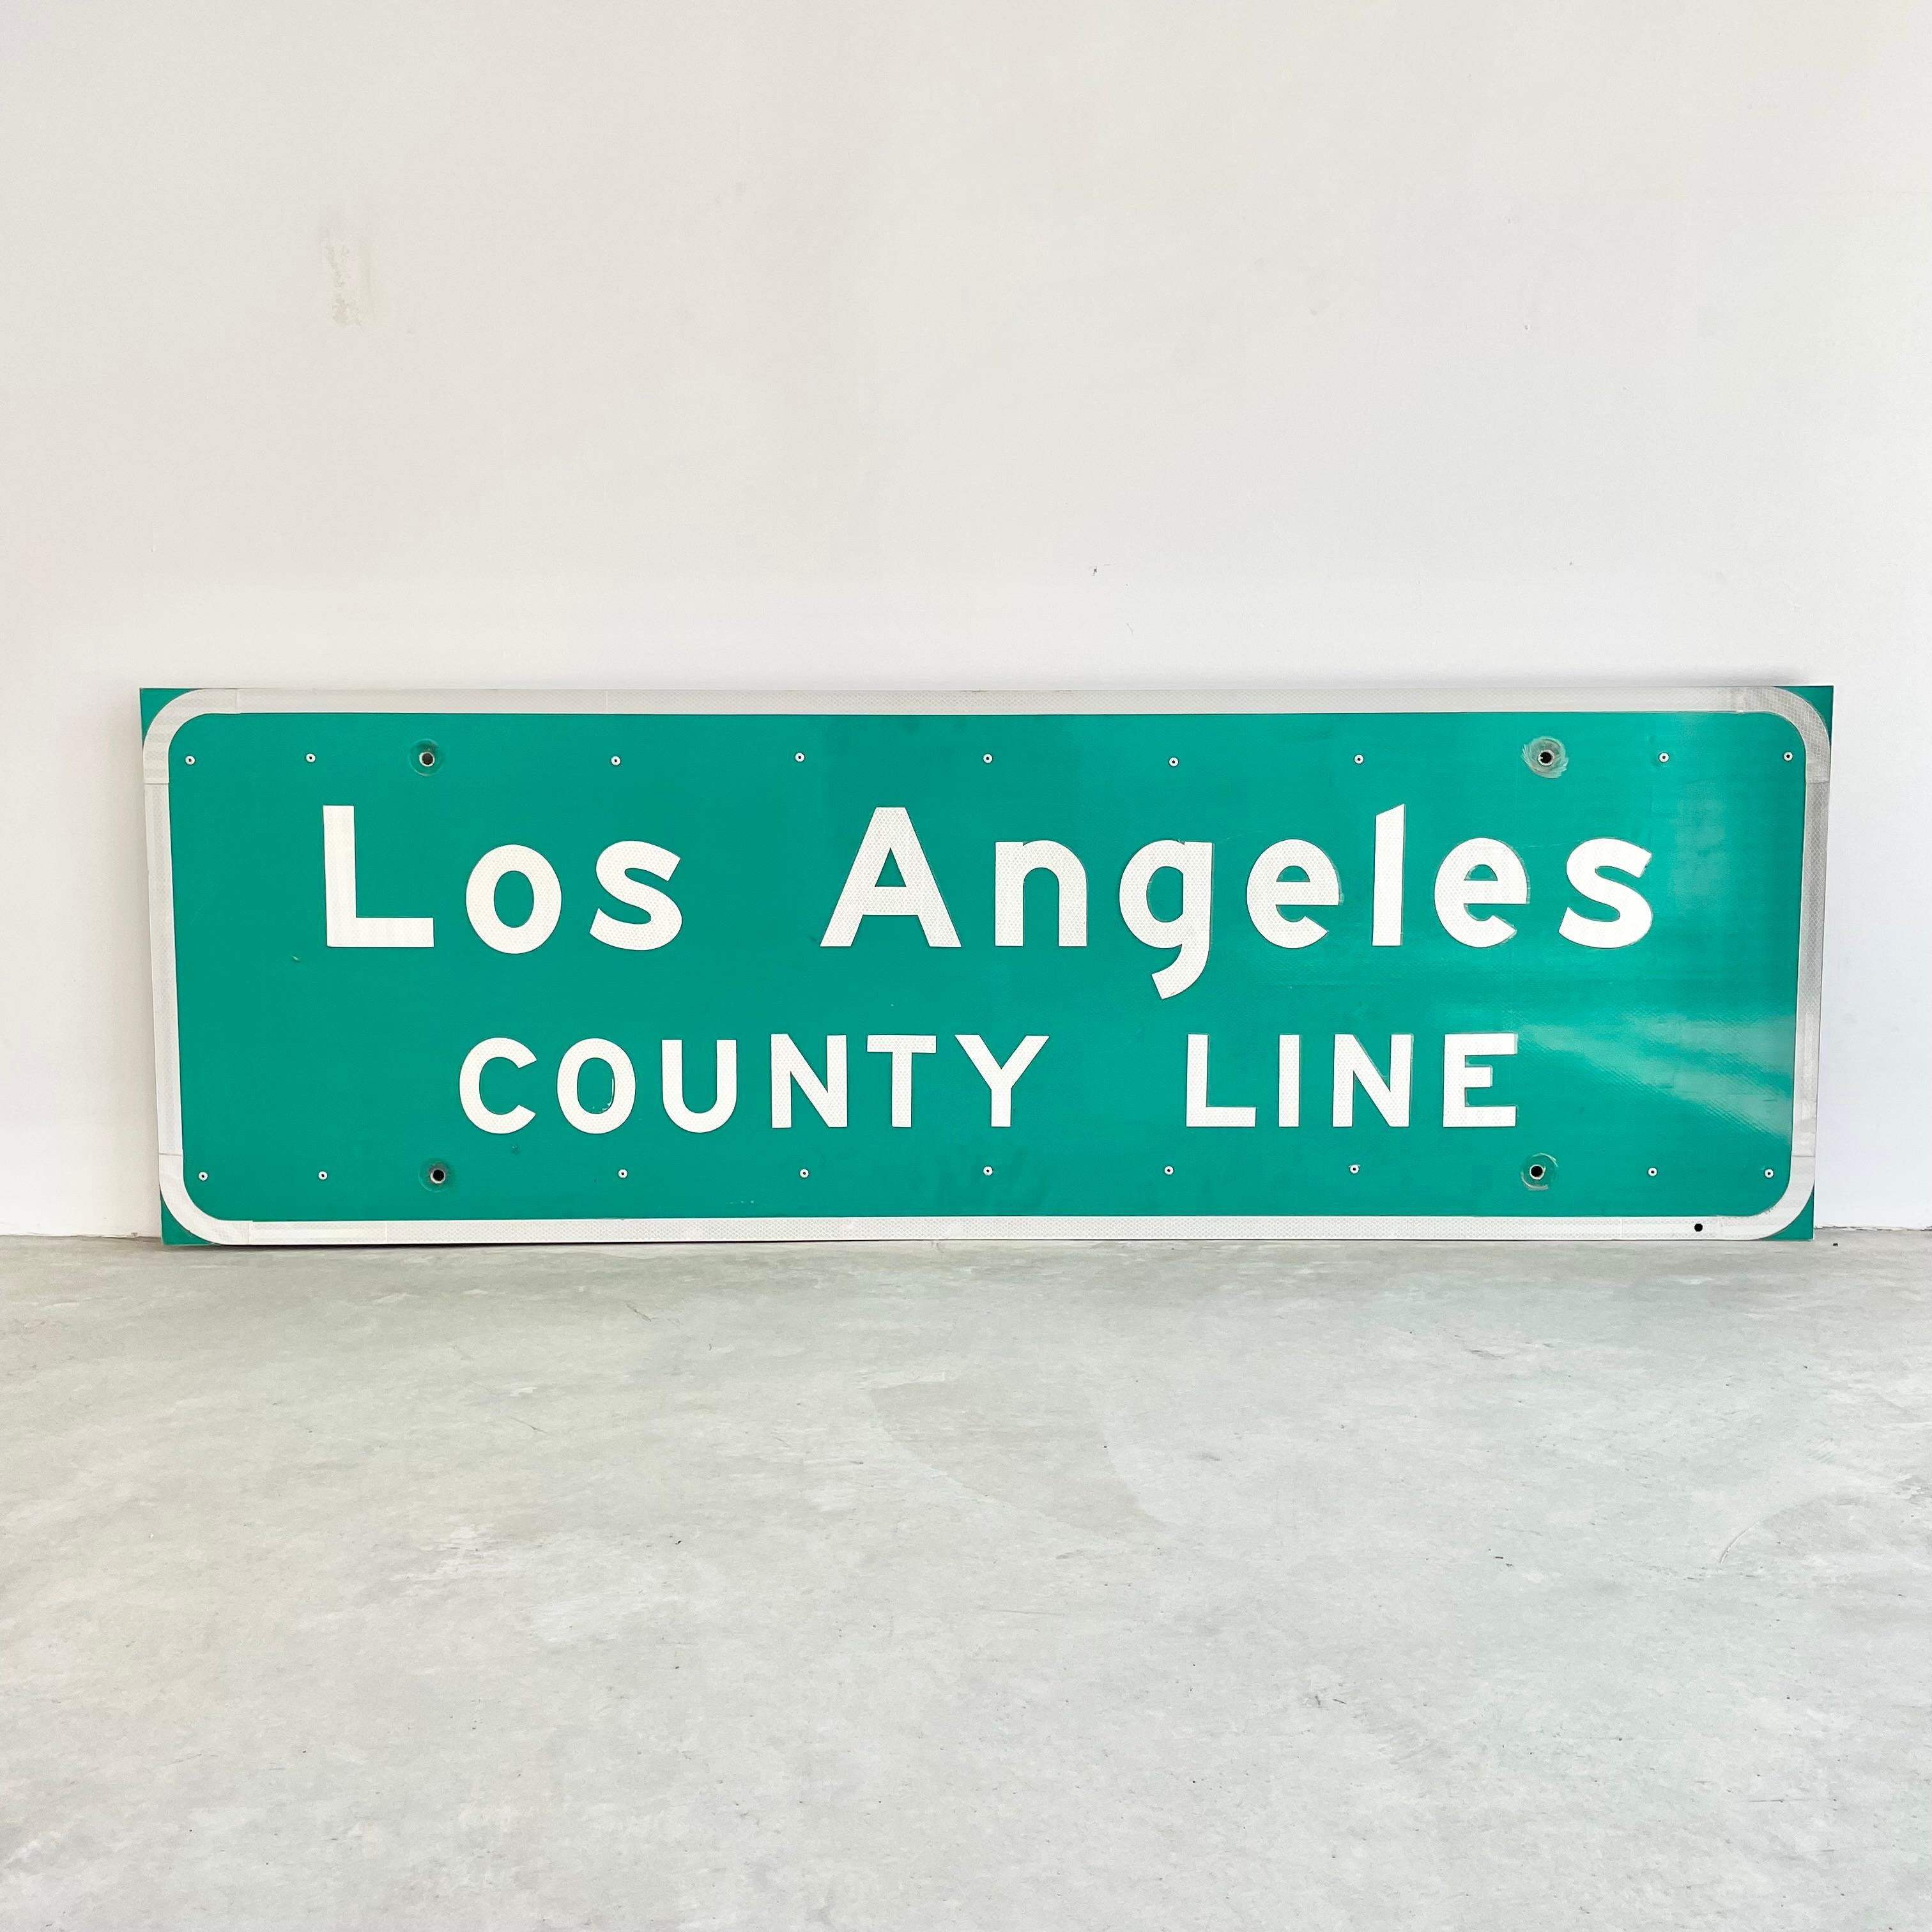 Super cool Los Angeles freeway sign. Made in the late 1990s. This sign welcomed you as you entered the county of Los Angeles. Reflective letters and border as well as a protective plastic sheet over the face. Stamped 